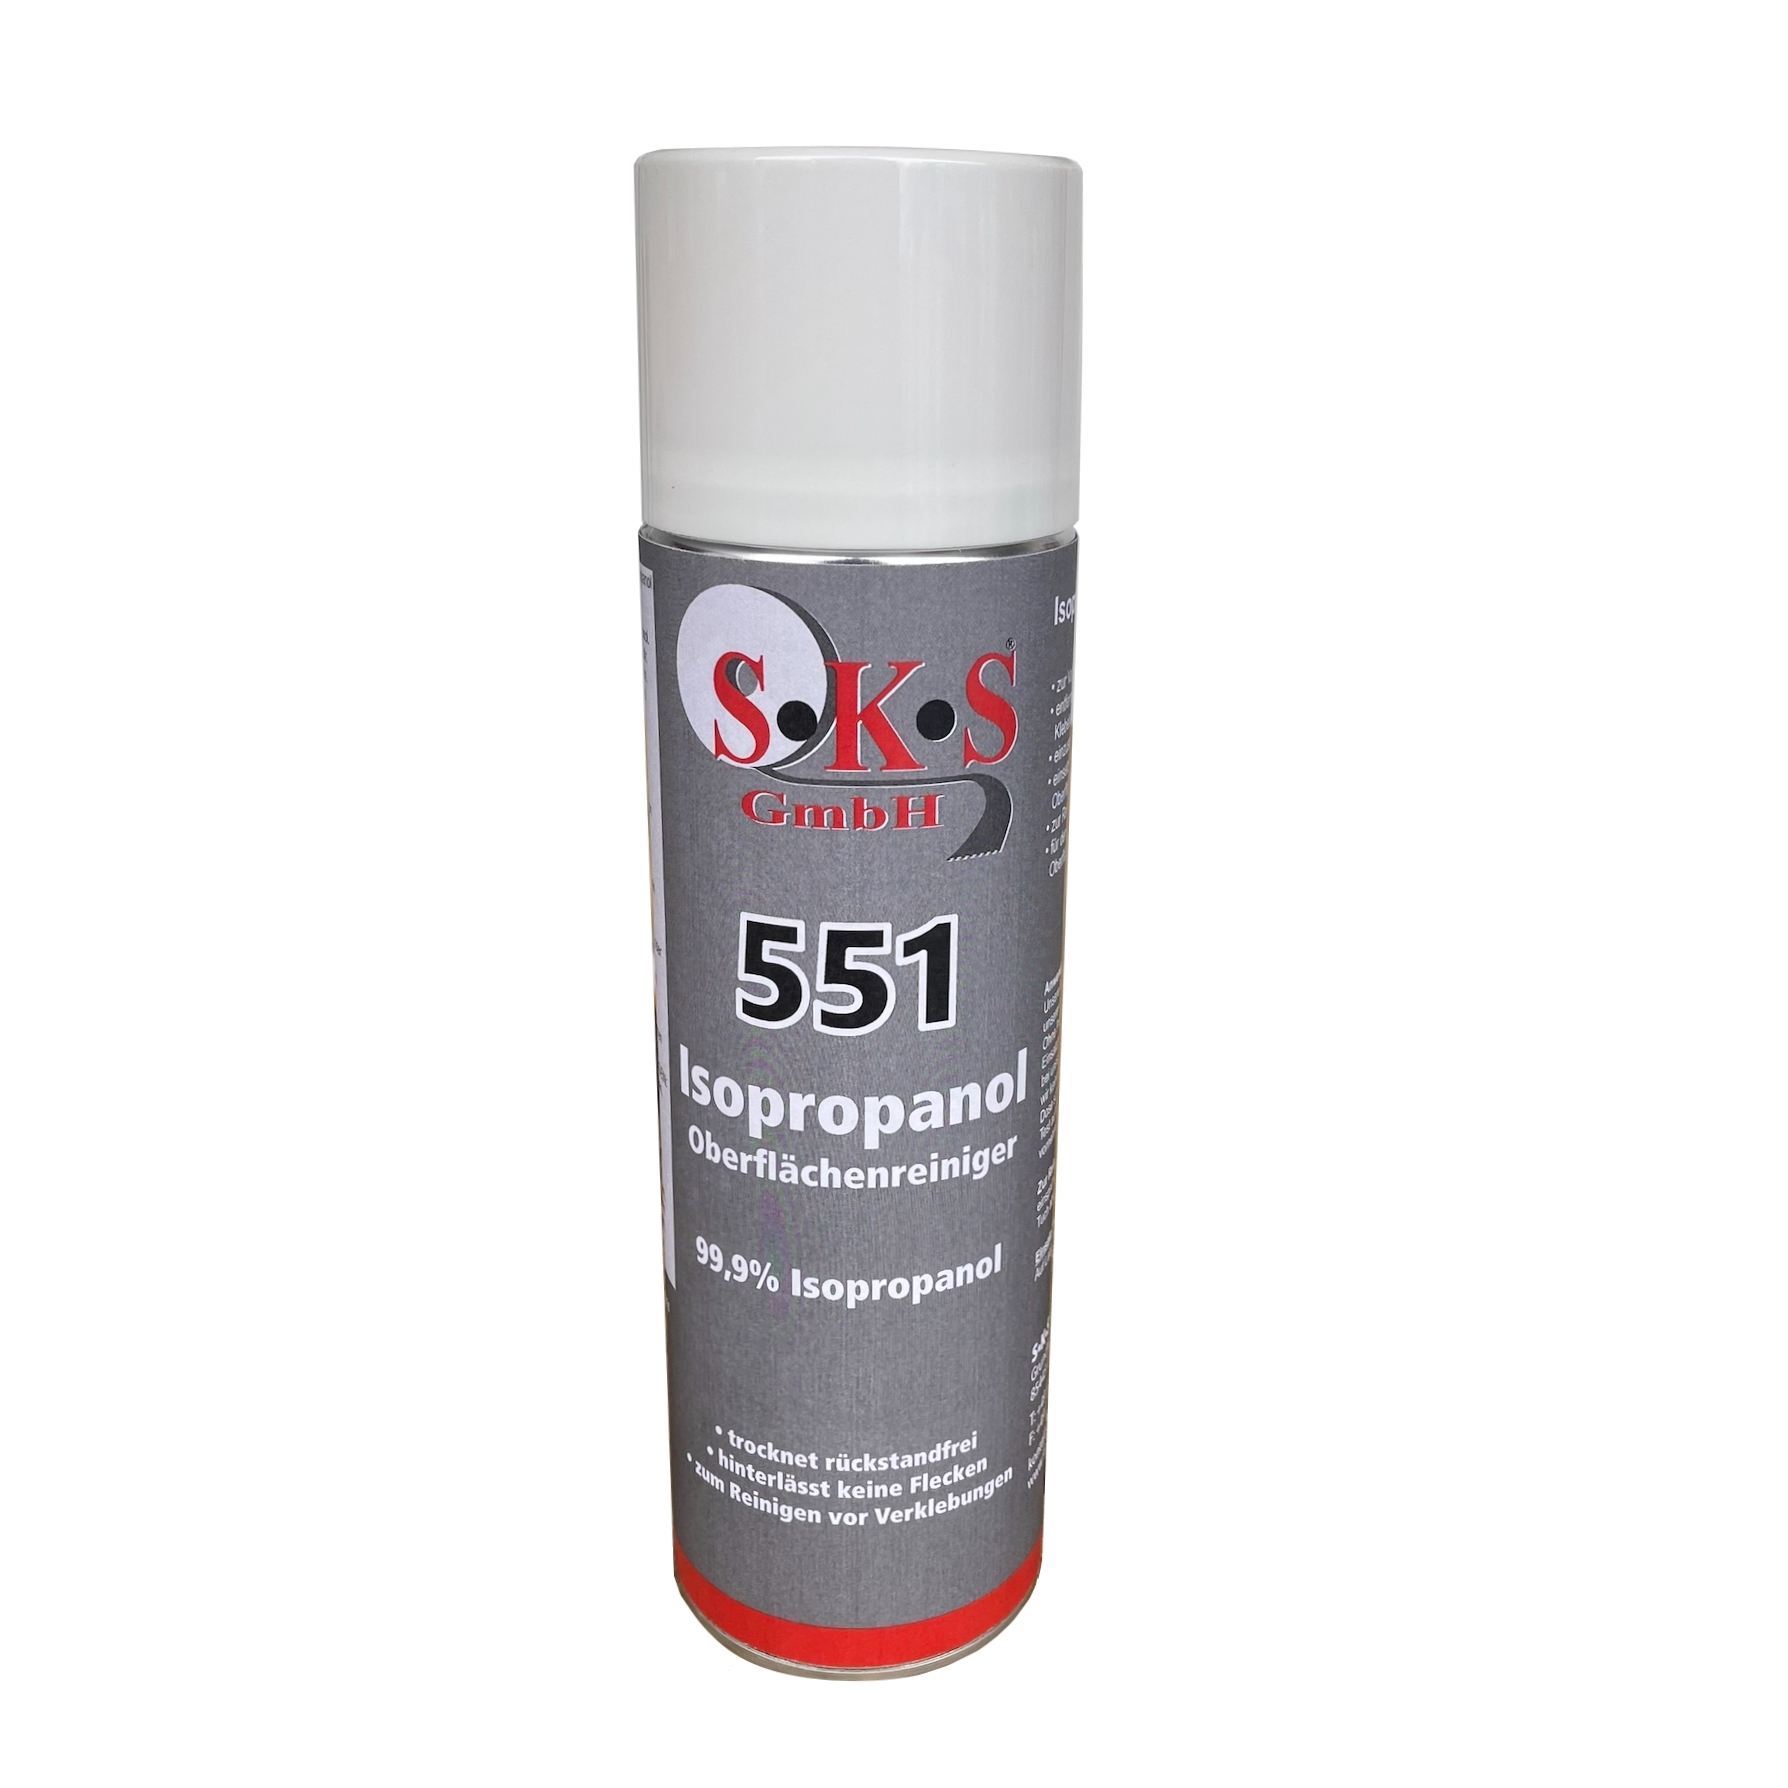 S-K-S 551 Surface cleaner isopropanol 99.9% in a spray can 500ml